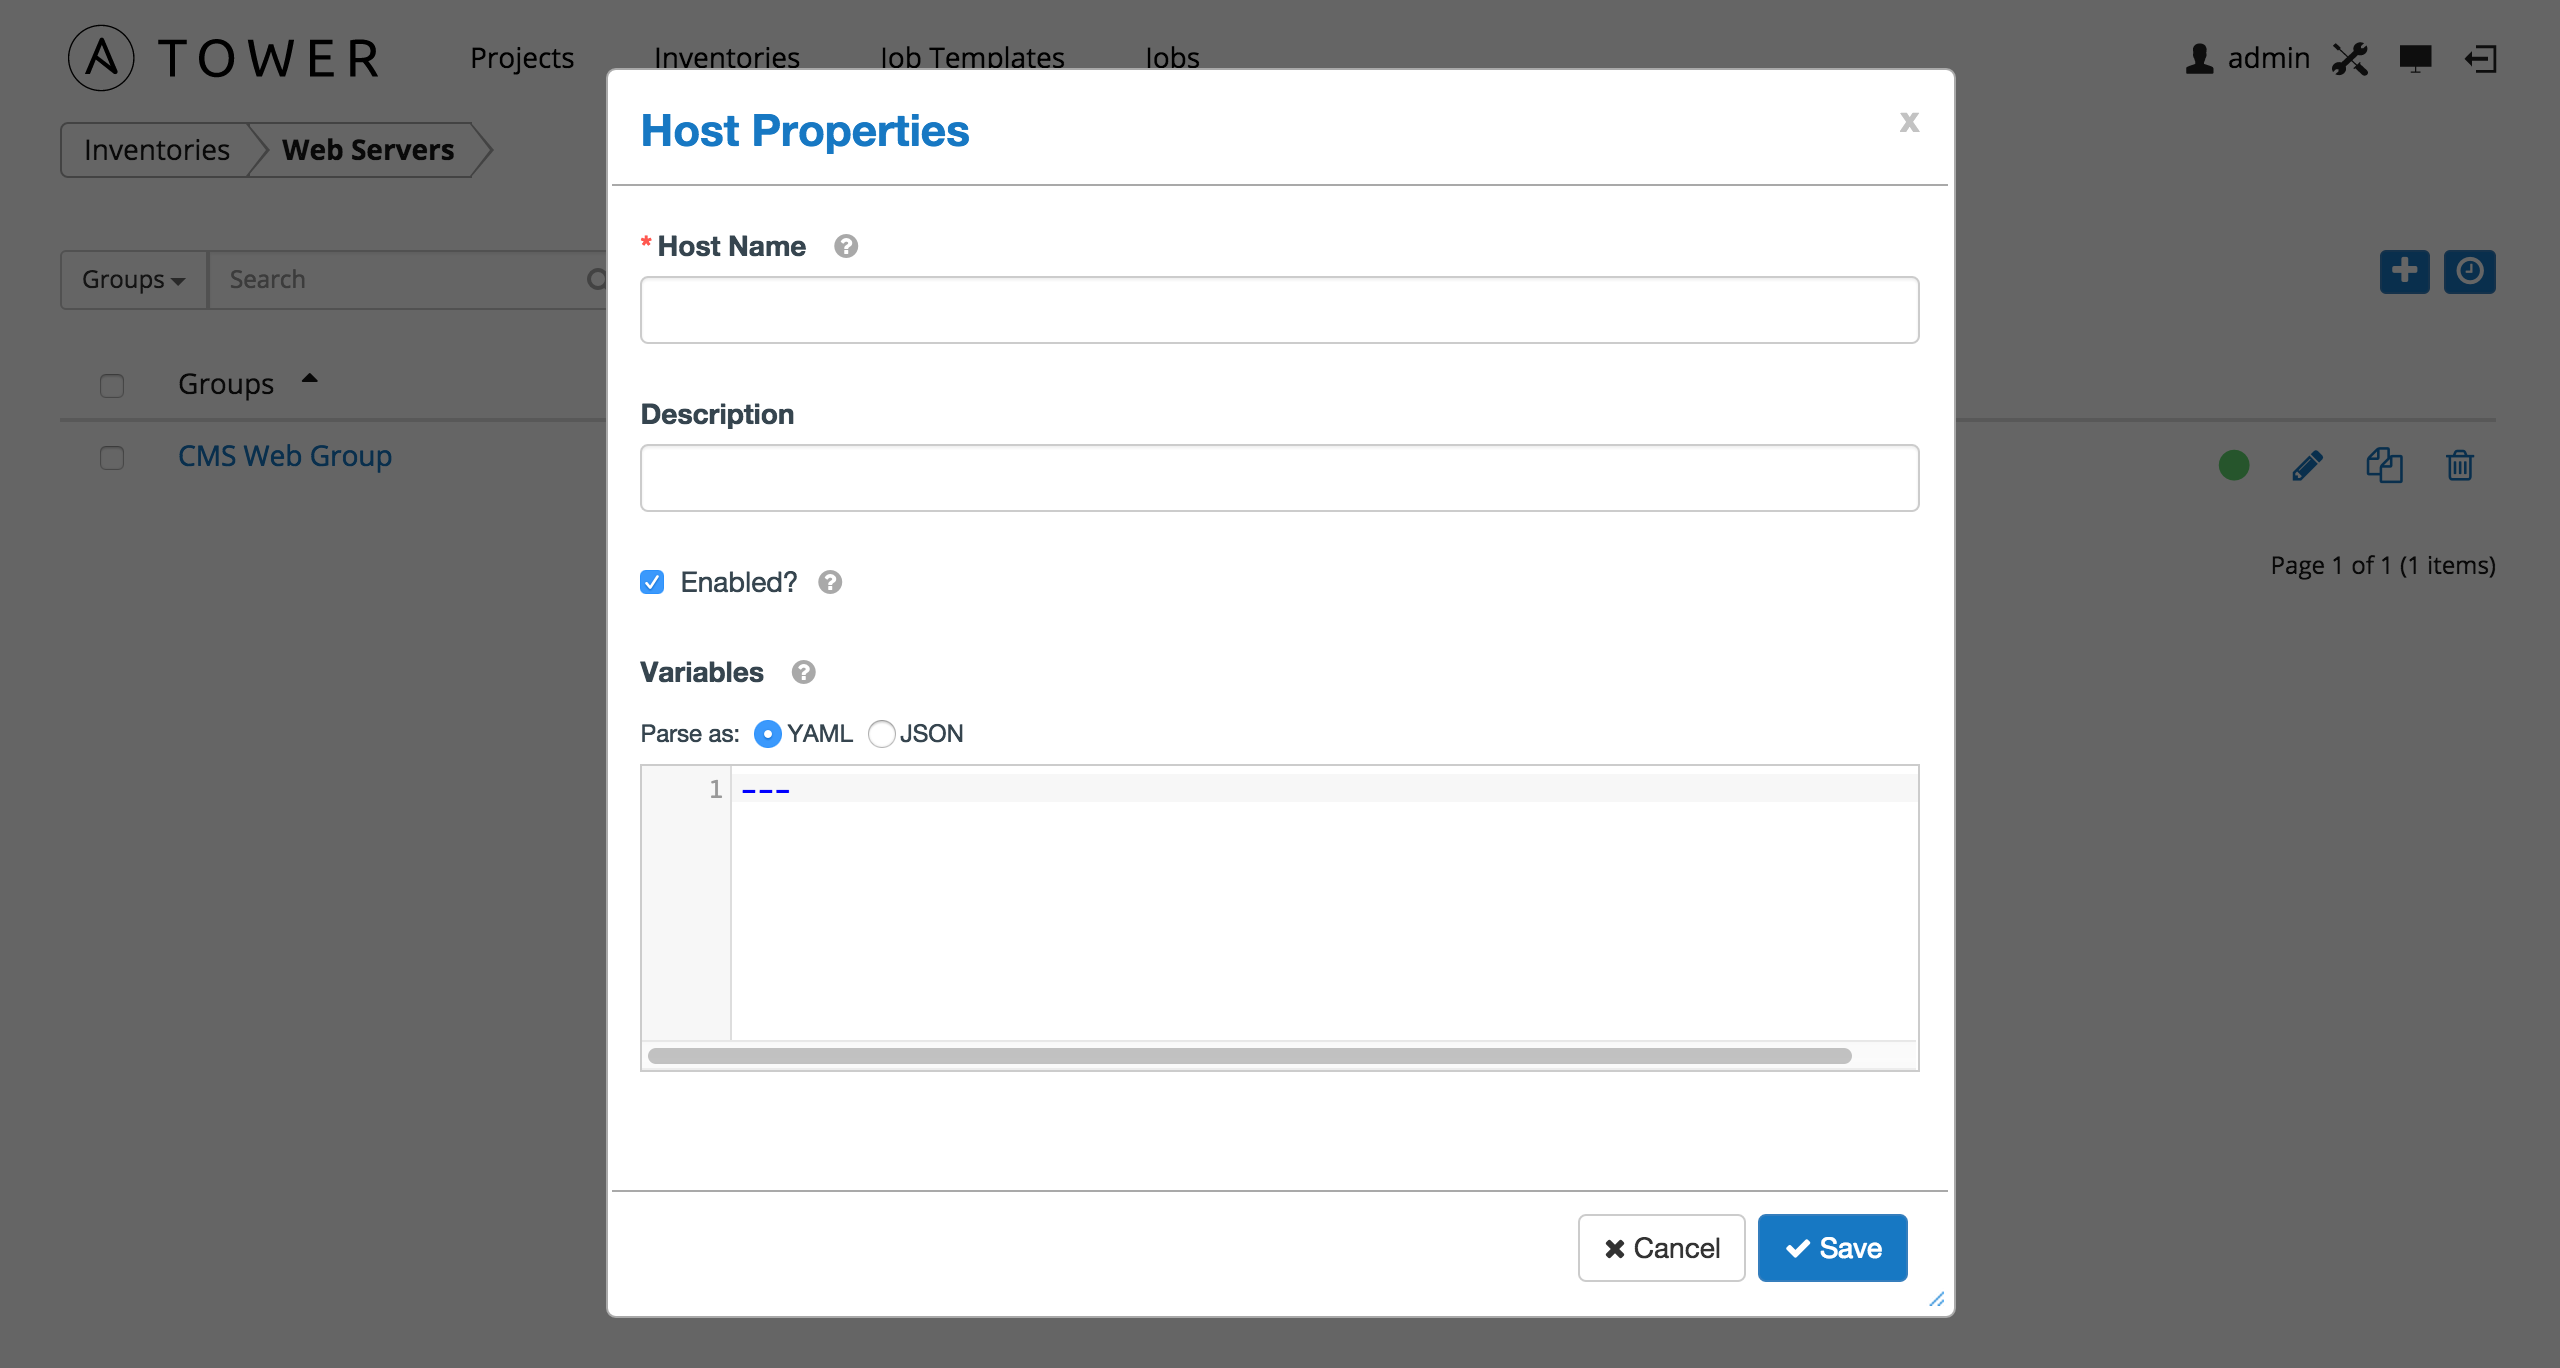 Inventories - create new host for example group